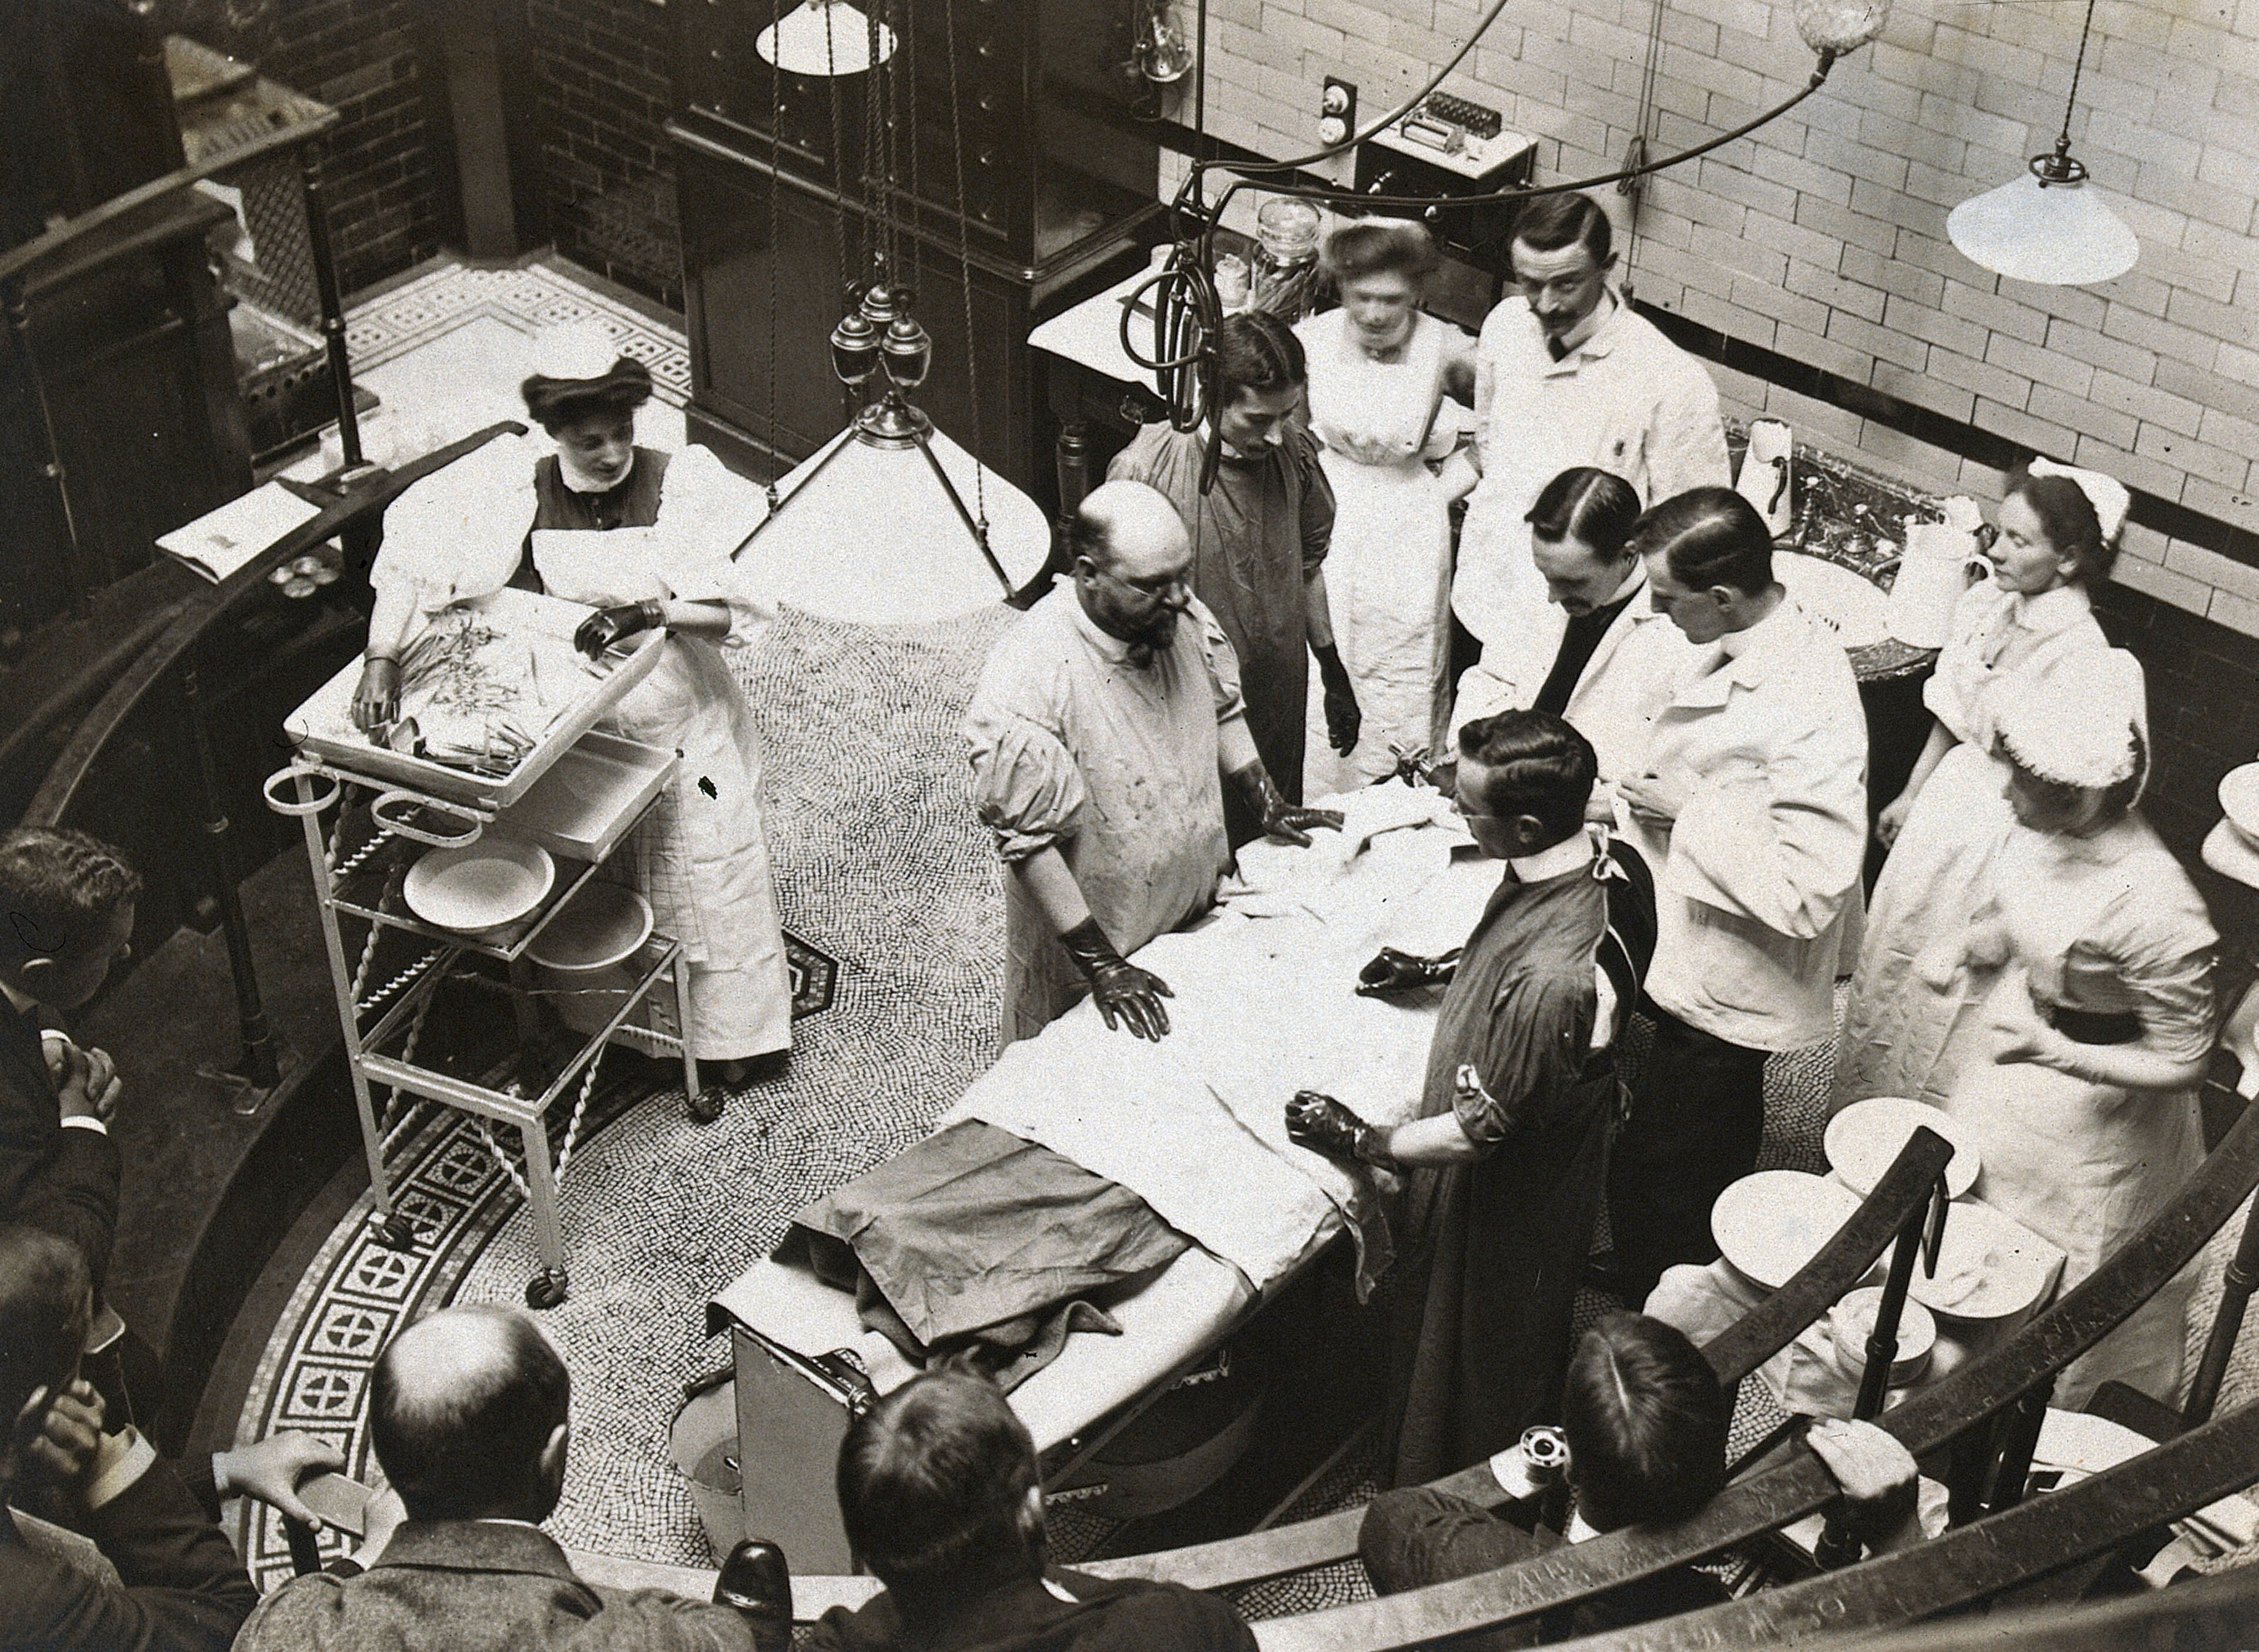 Charing Cross Hospital: Stanley Boyd in the old operating theatre. Photograph, 1900.